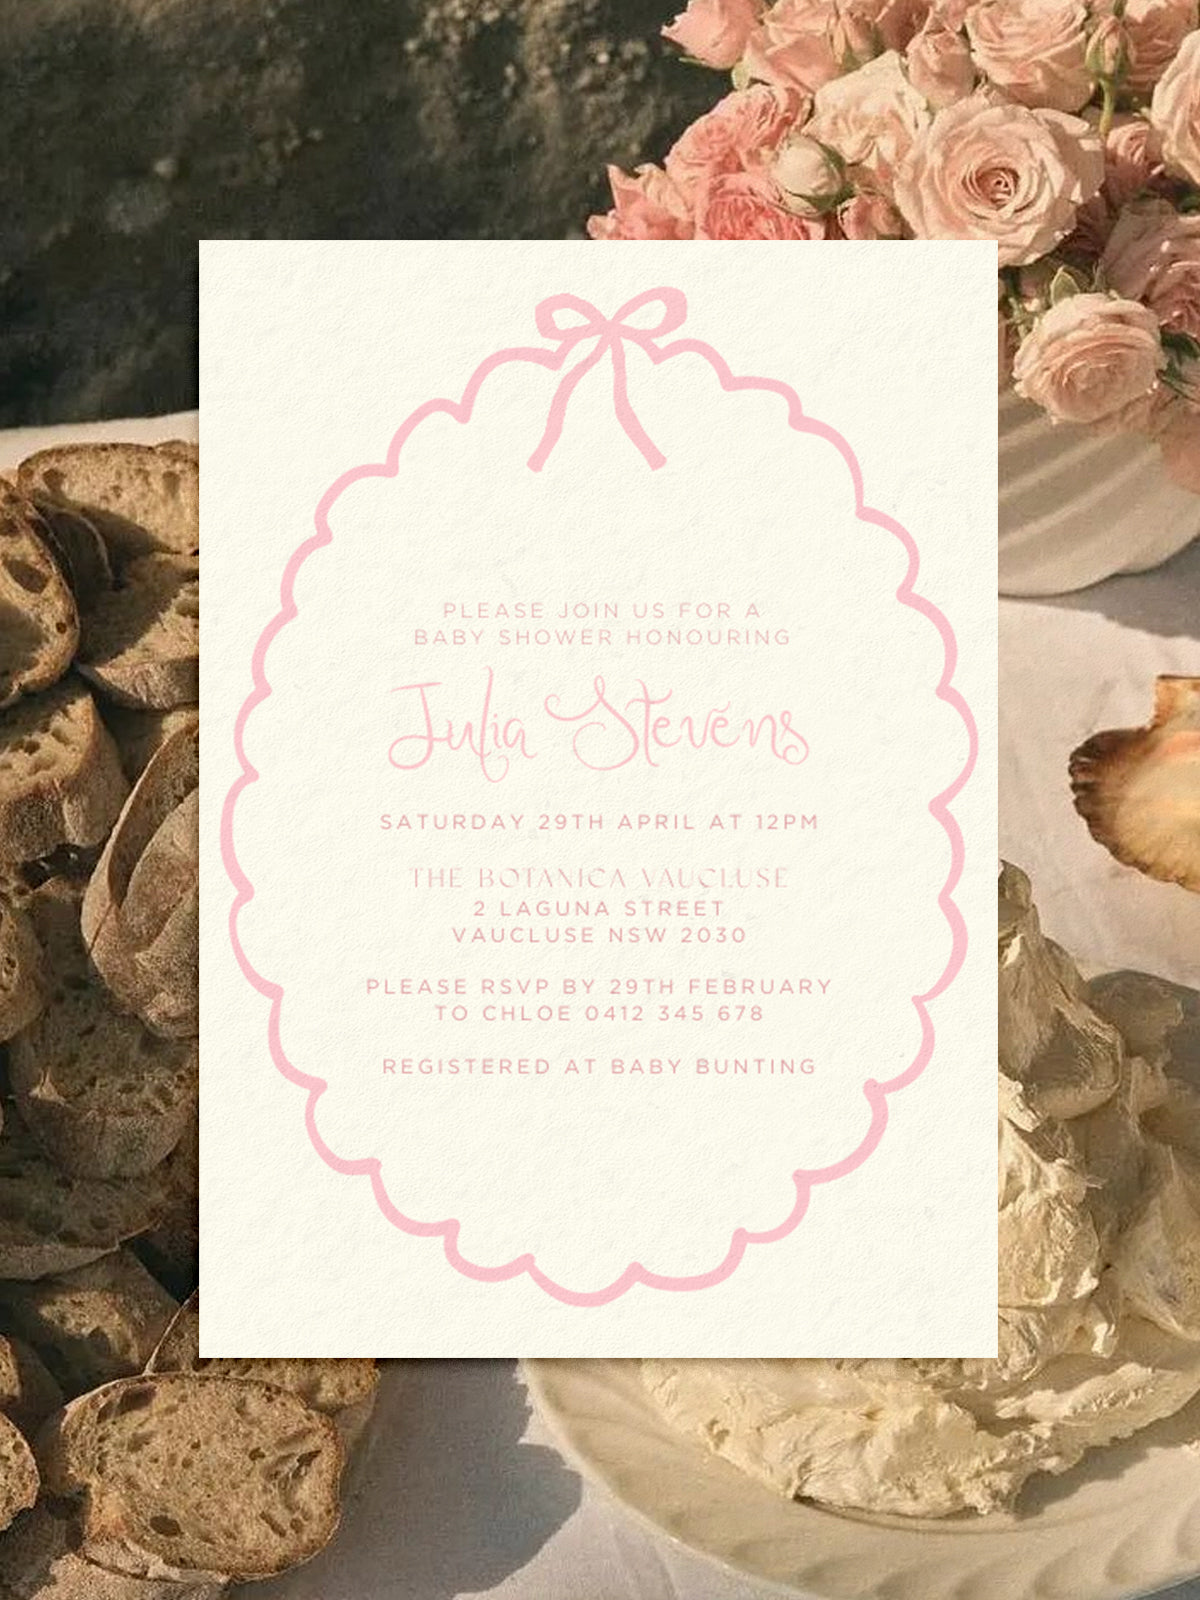 Baby Shower Invite Editable Template - Pink Ribbon - Vorfreude Stationery